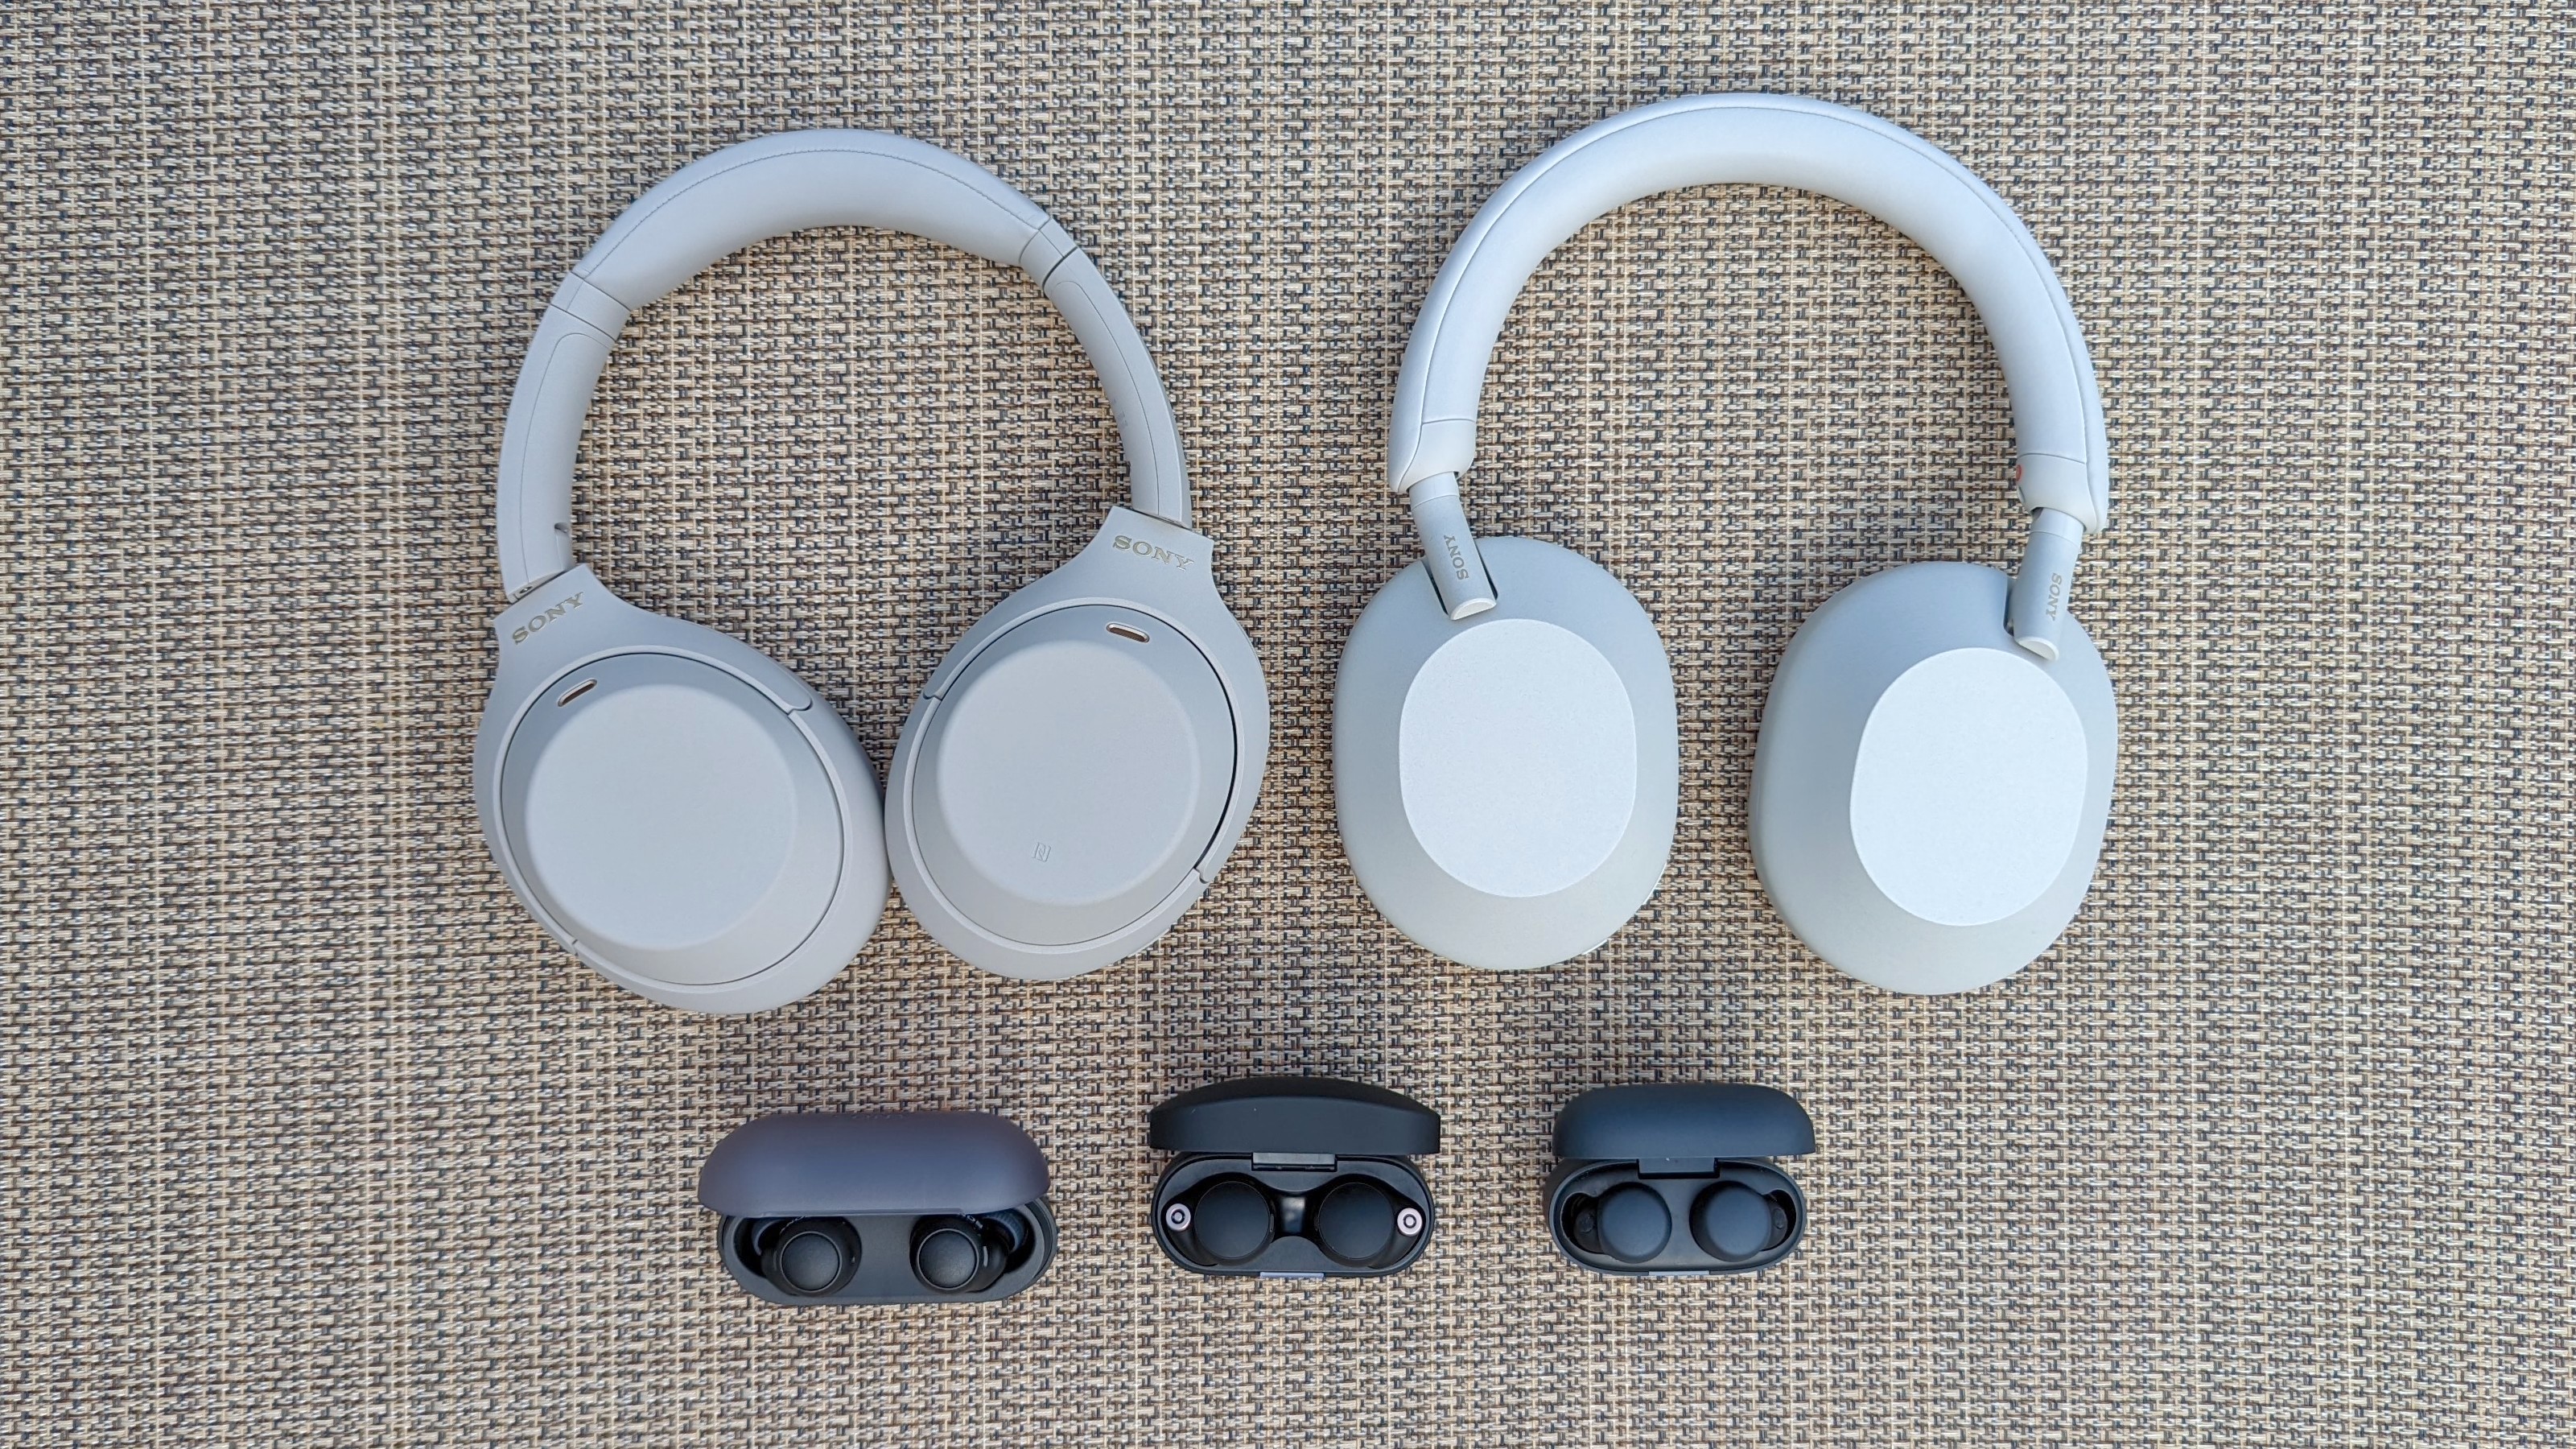 Sony LinkBuds True wireless earbuds with open-air design at Crutchfield